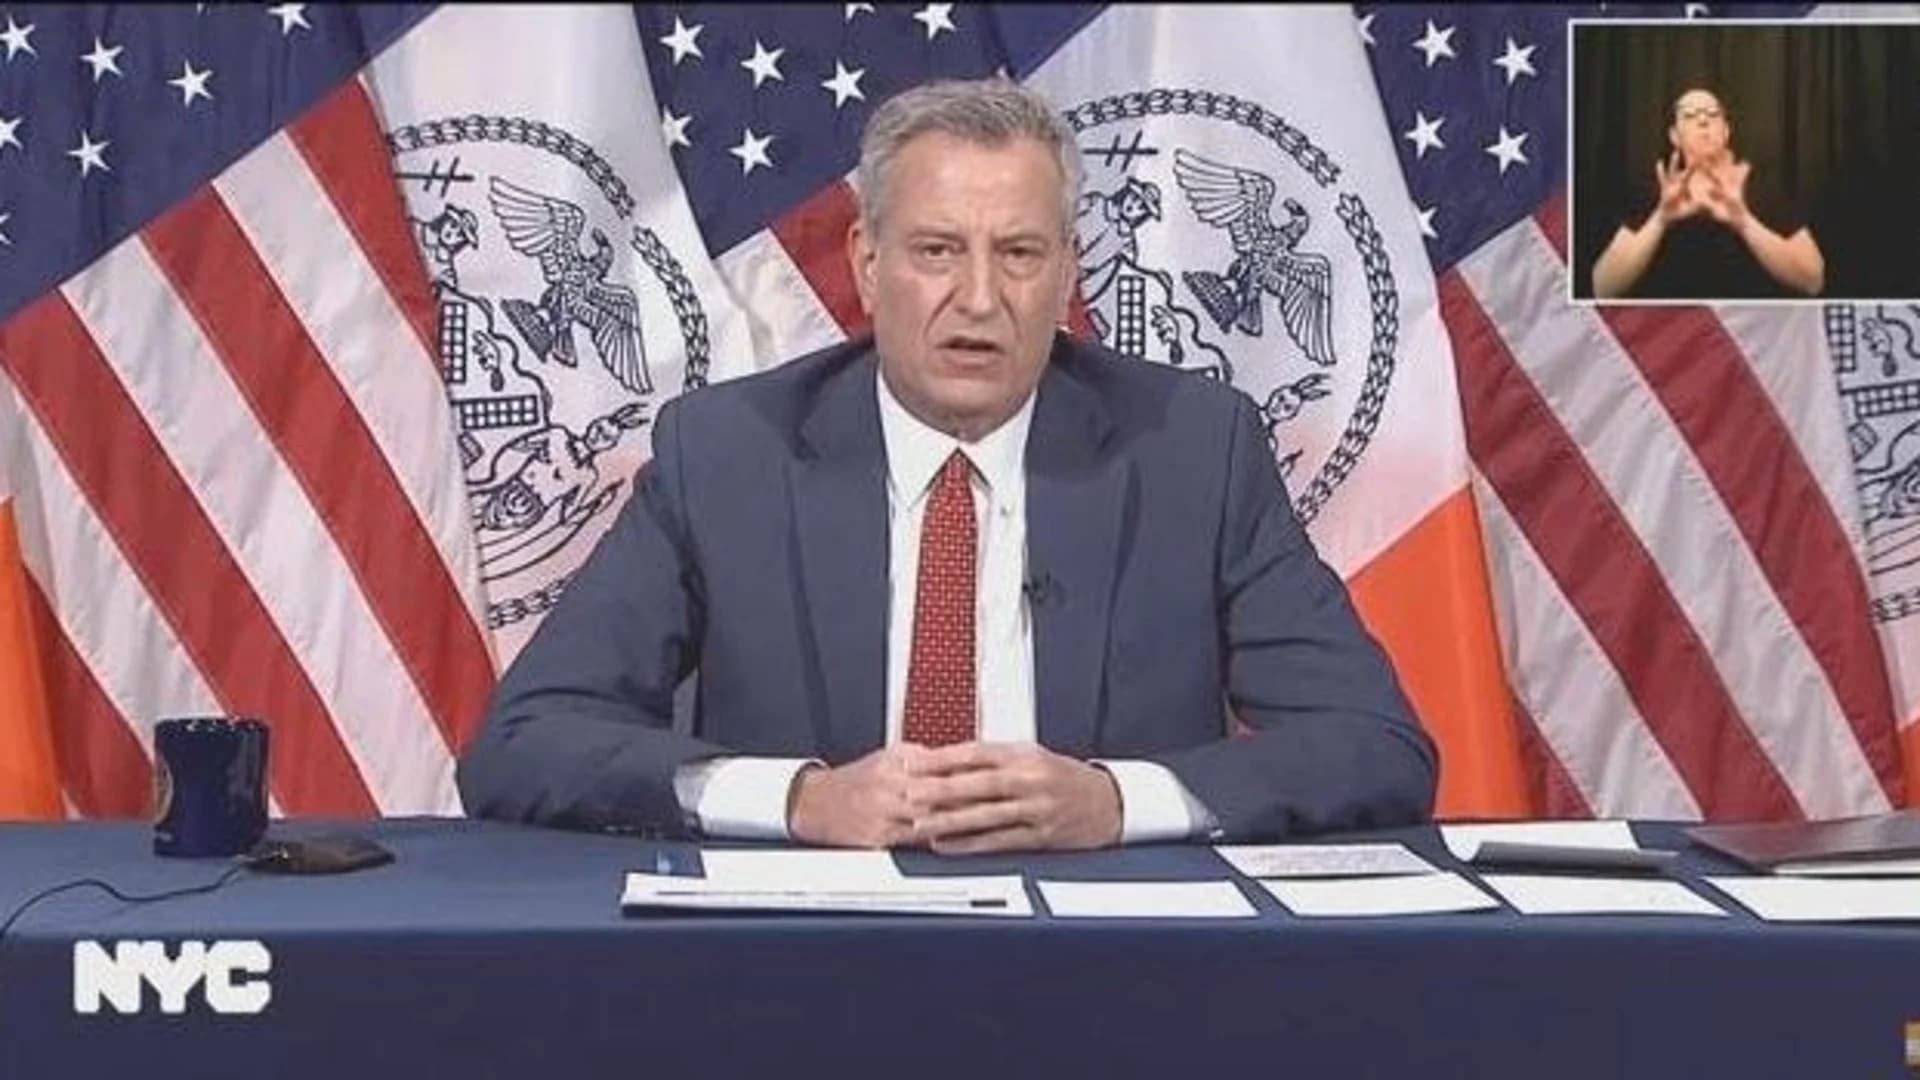 Mayor announces new rules for expedited investigations, discipline for NYPD officers